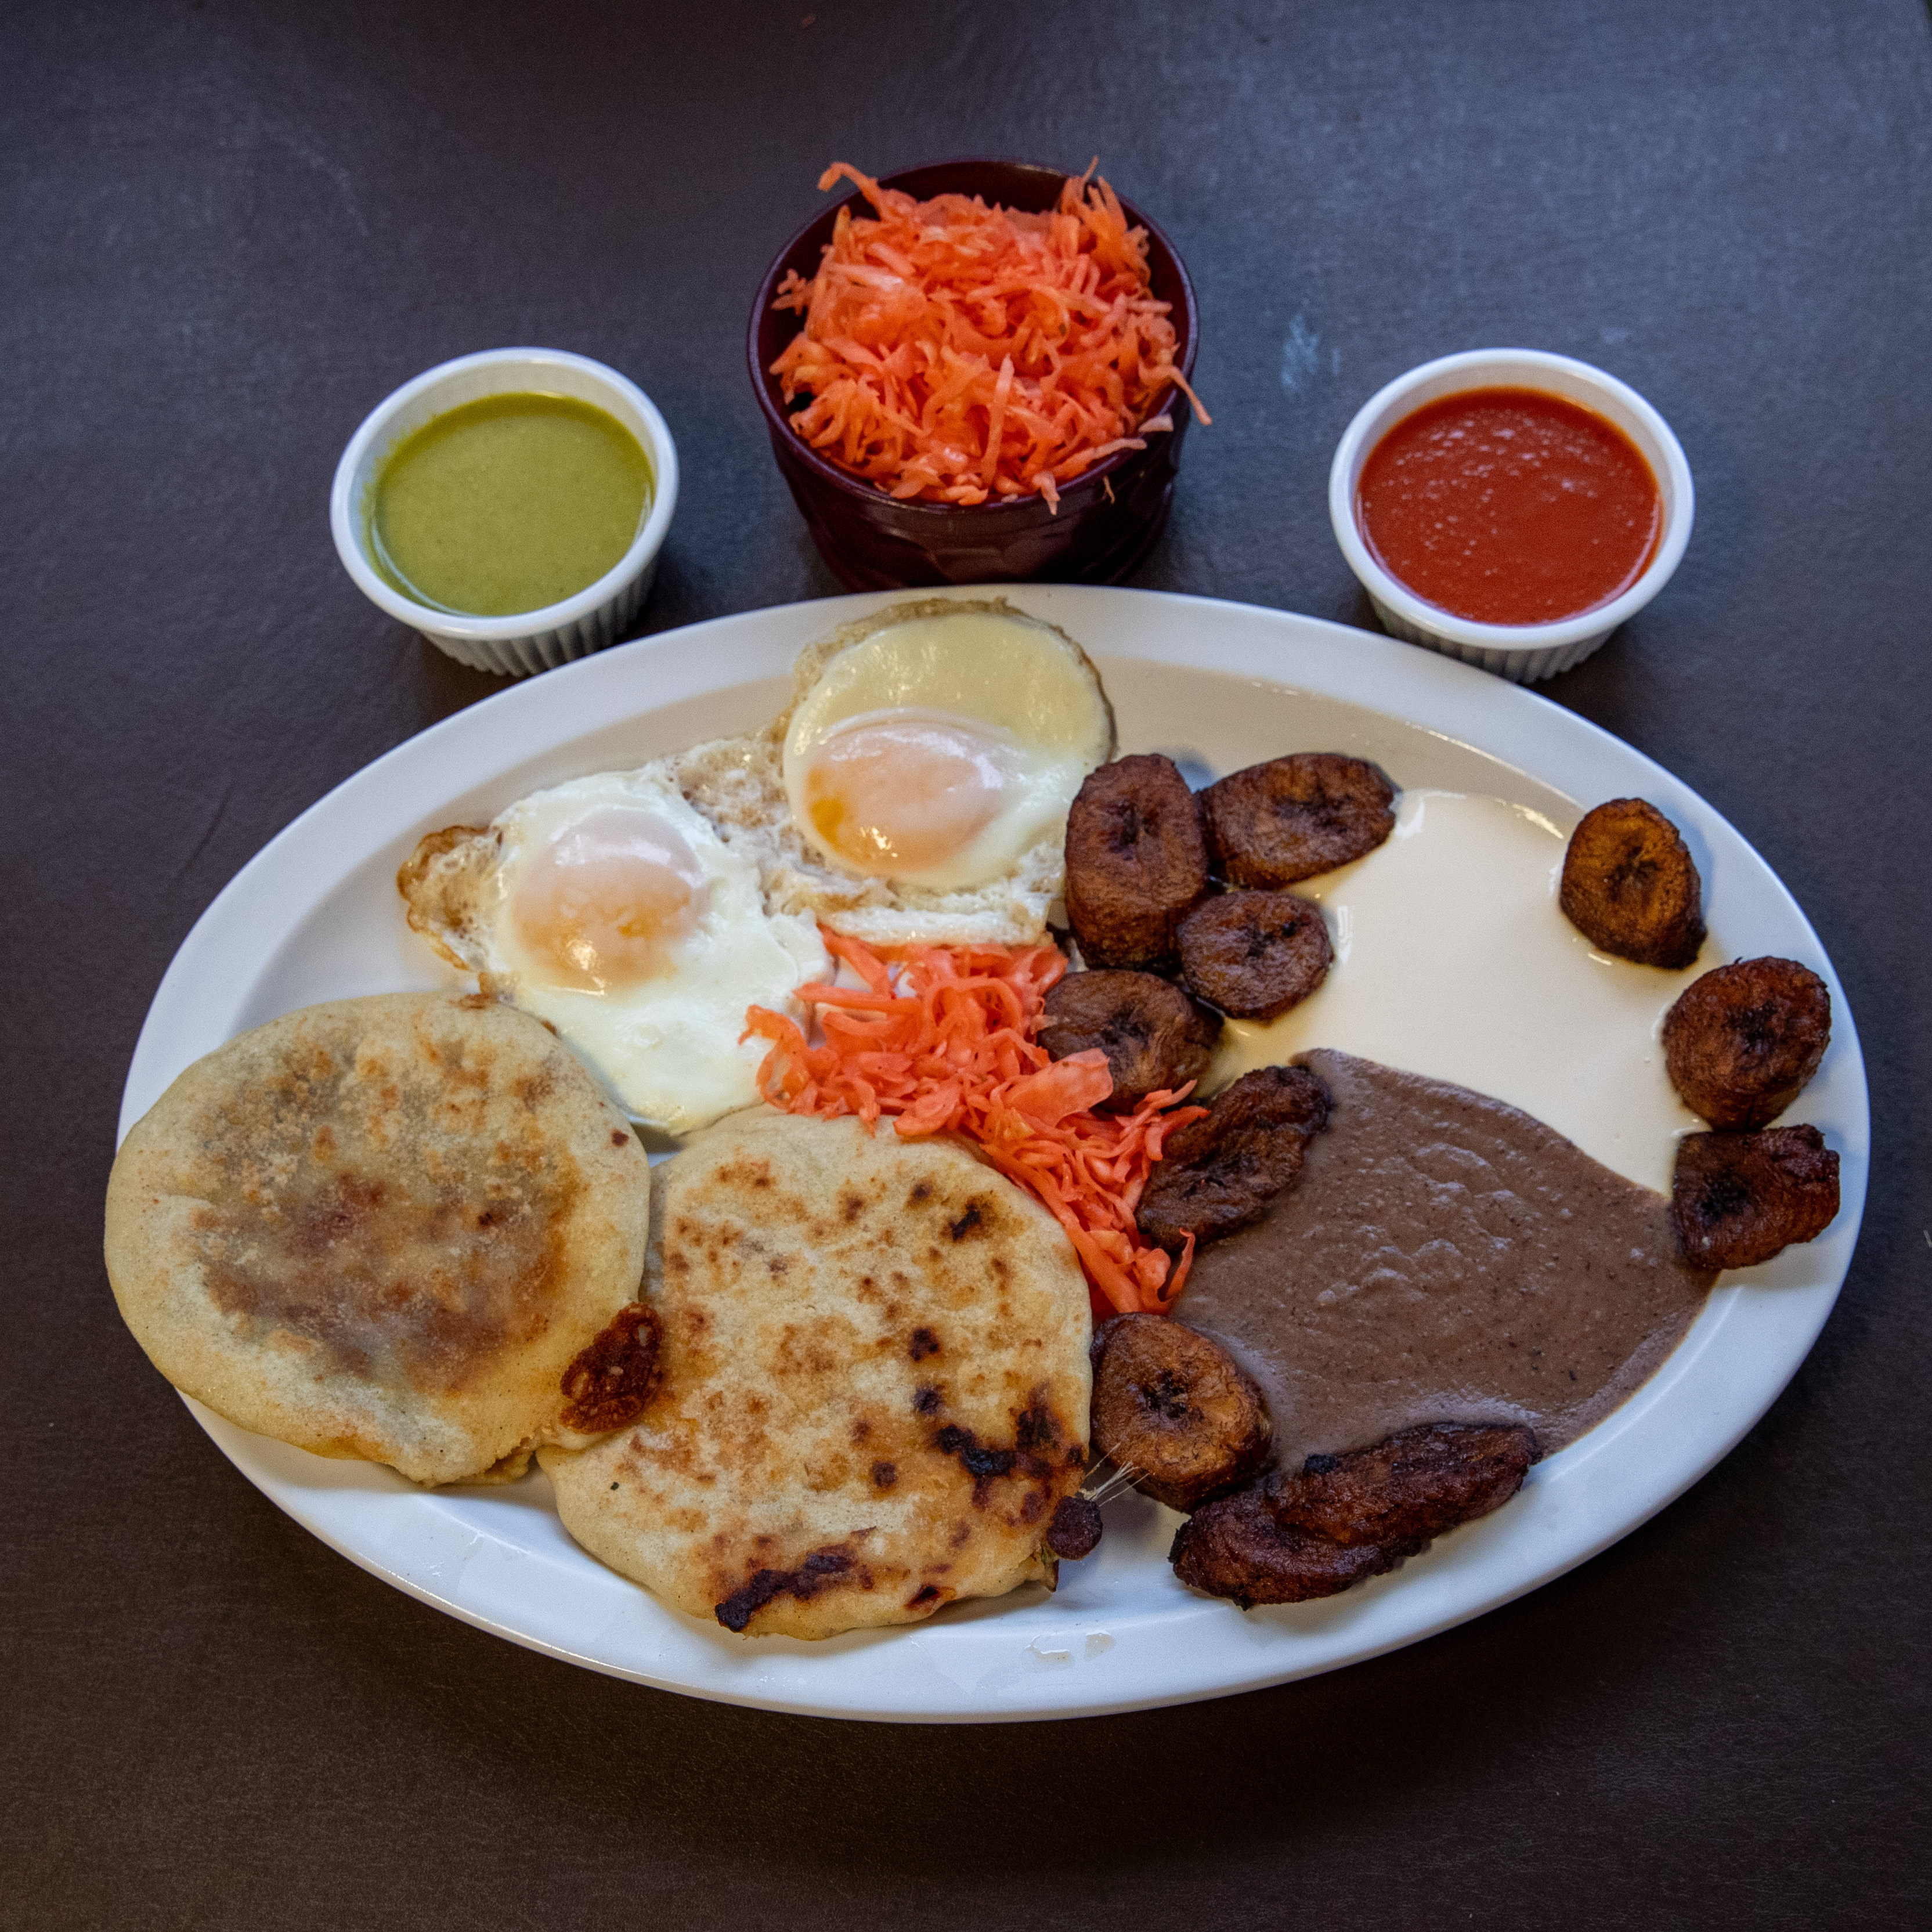 Super Special - two over easy eggs, two pupusas, Salvadorian cream, fried beans, curtido (lightly fermented cabbage relish), plantains and salsa for $18.99 at Pupuseria El Salvador in Wyoming on Thursday, Oct. 19, 2023. (Cory Morse | MLive.com)
